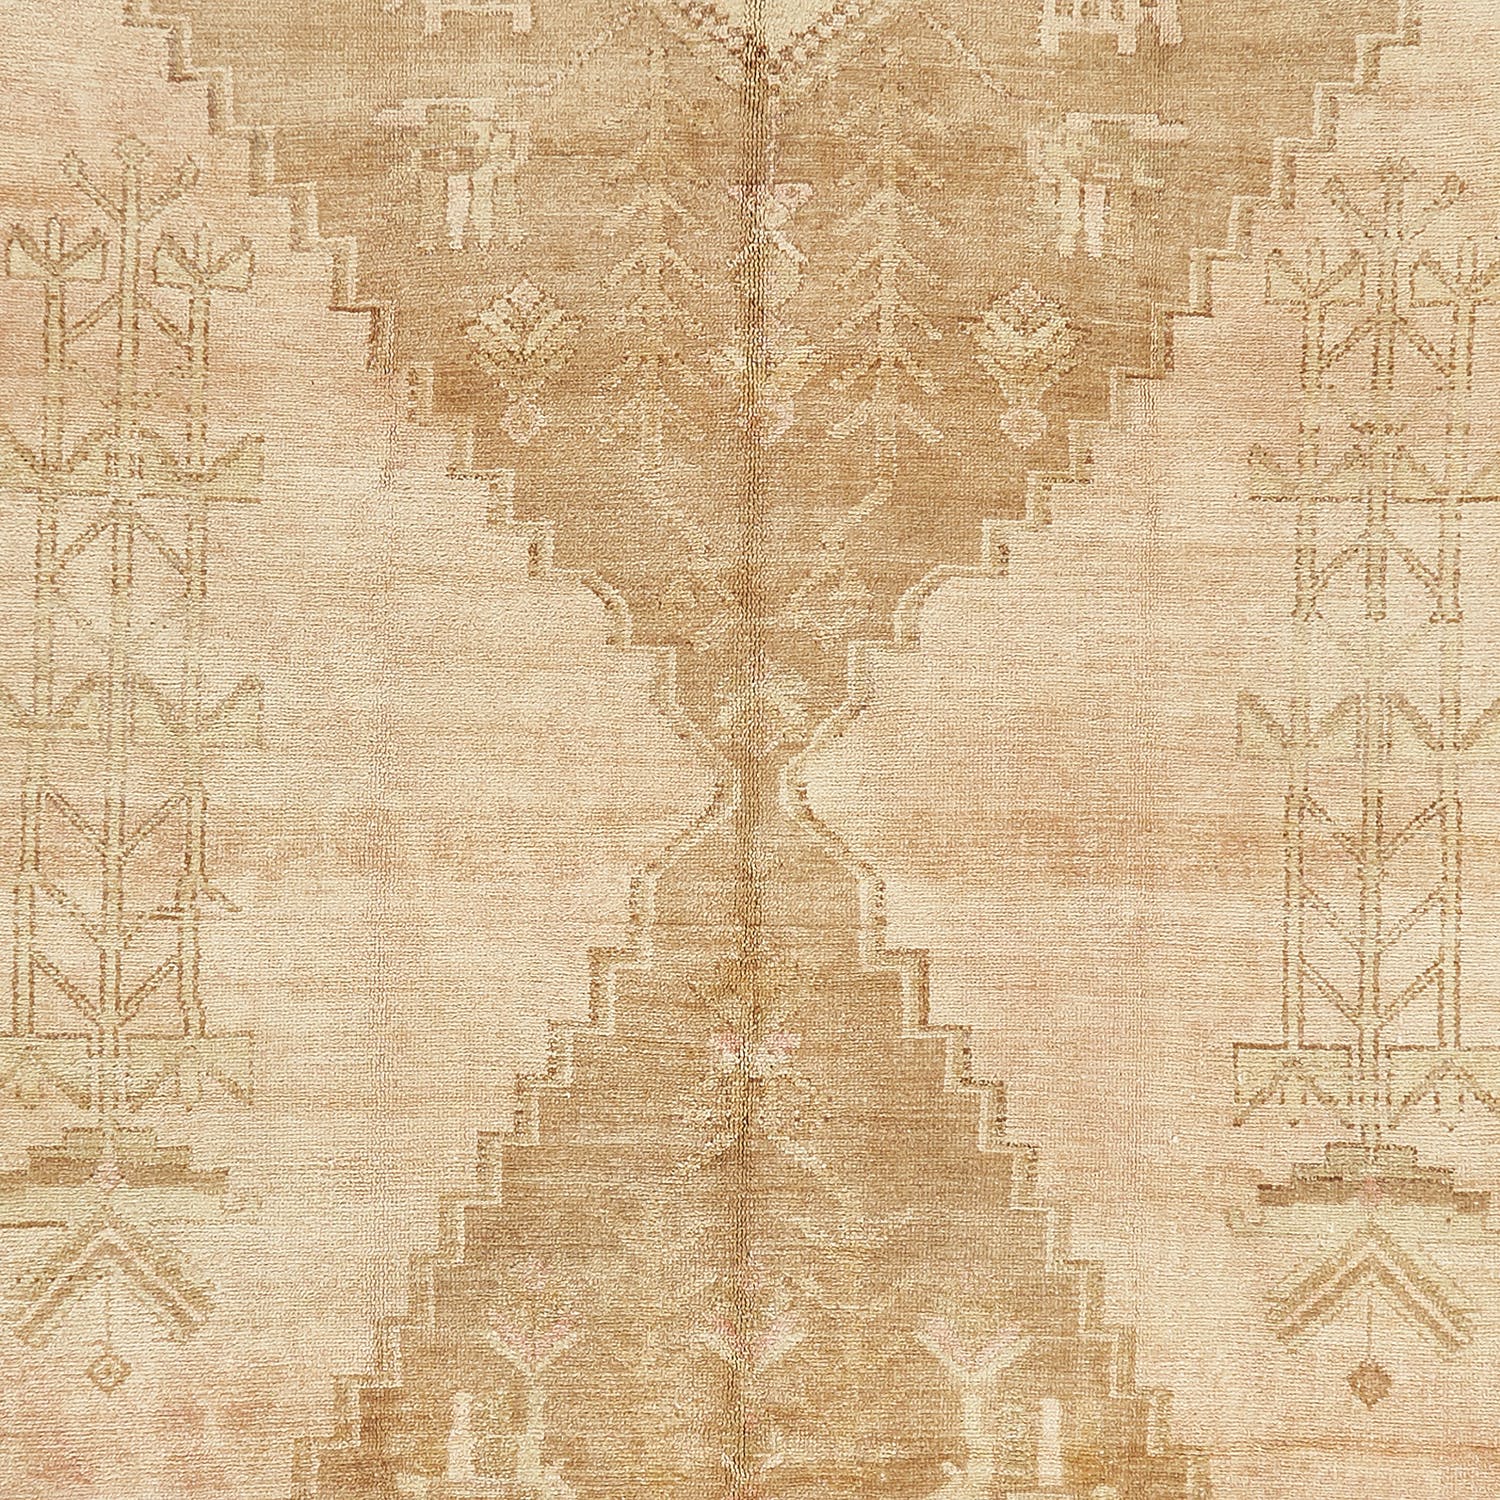 Vintage beige carpet with symmetrical Middle Eastern-inspired geometric patterns.